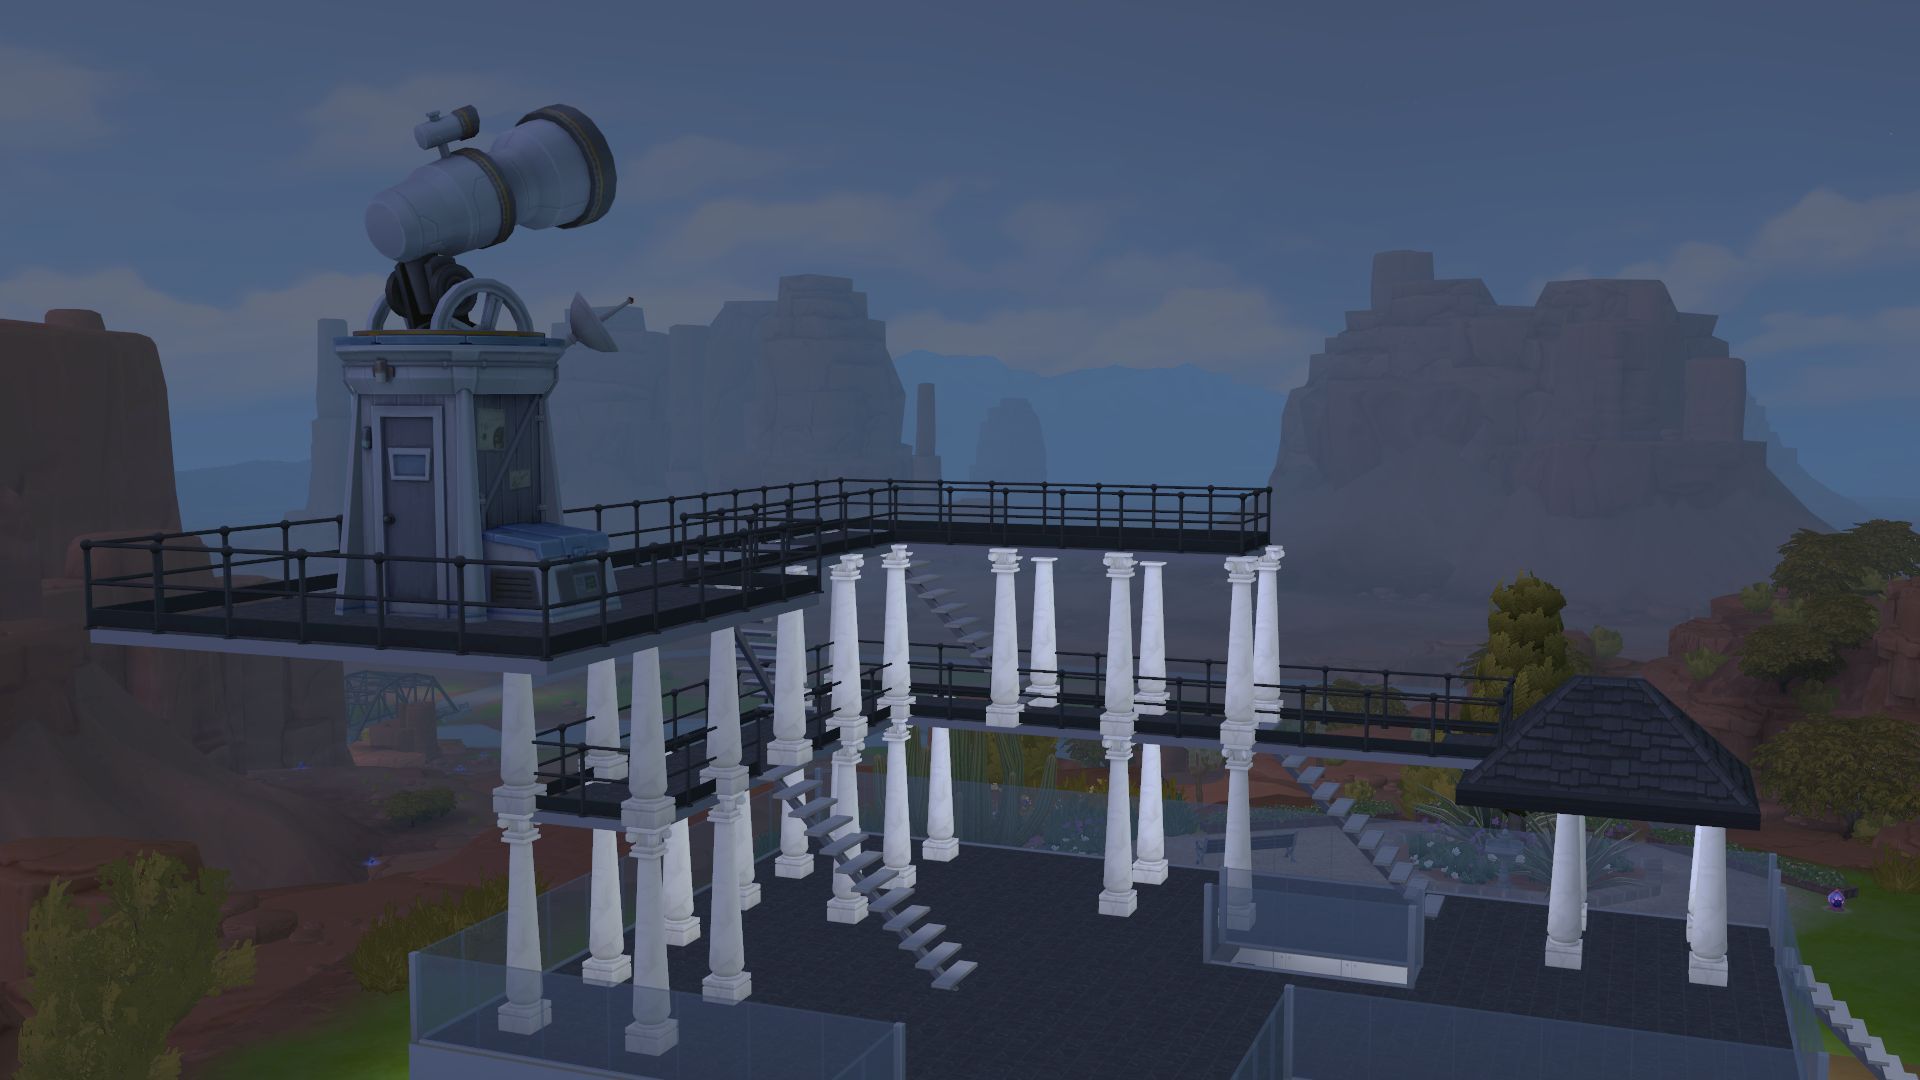 An image of the Curious's house from Sims 2 recreated in Sims 4; a Sim is using the telescope to look at the sky at night.